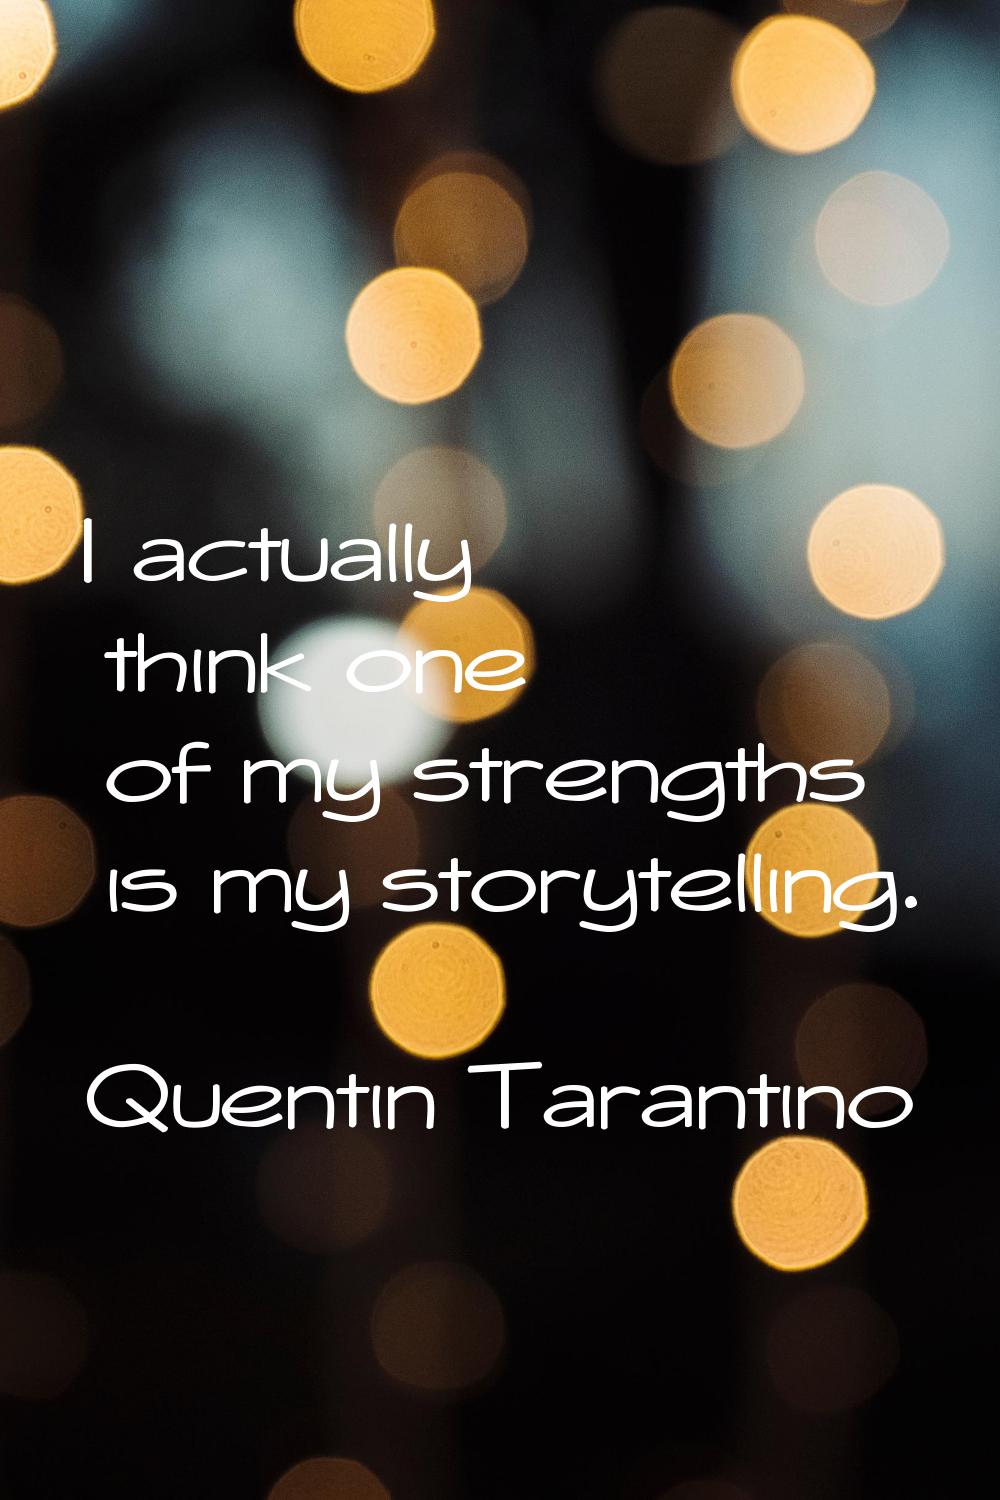 I actually think one of my strengths is my storytelling.